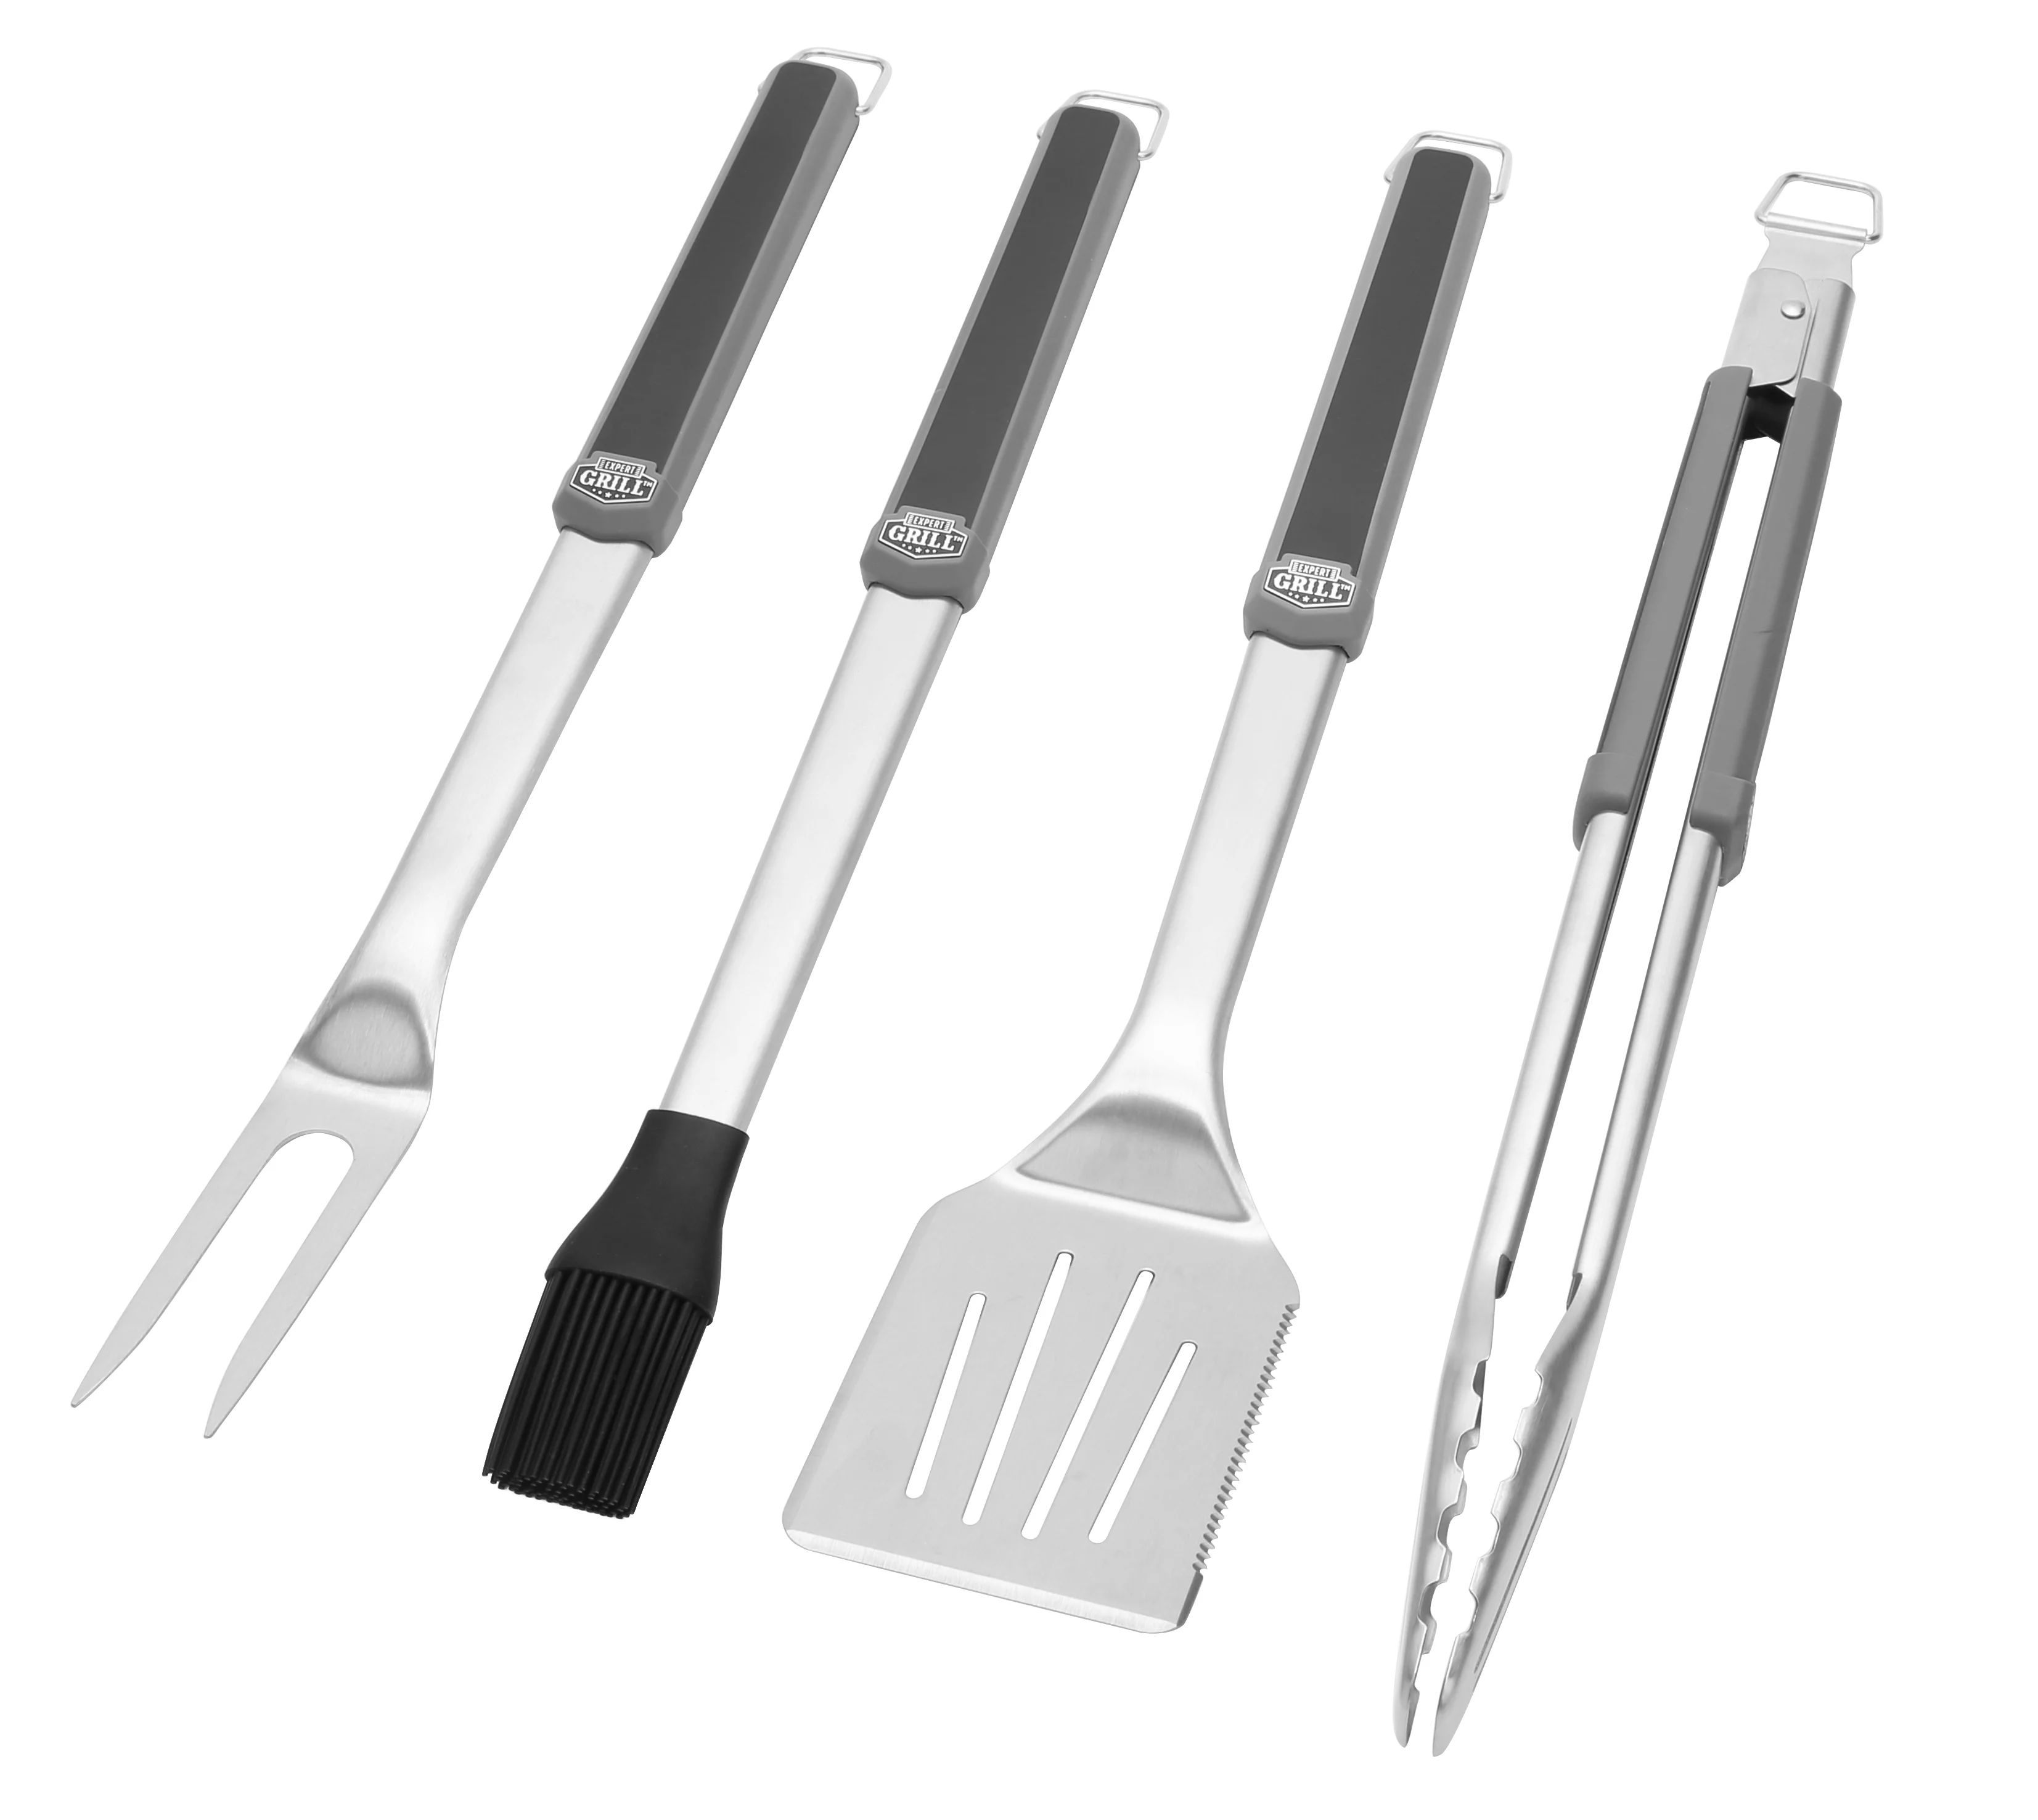 Expert Grill Stainless Steel 4-Piece BBQ Tool Set with Soft Grip | Walmart (US)